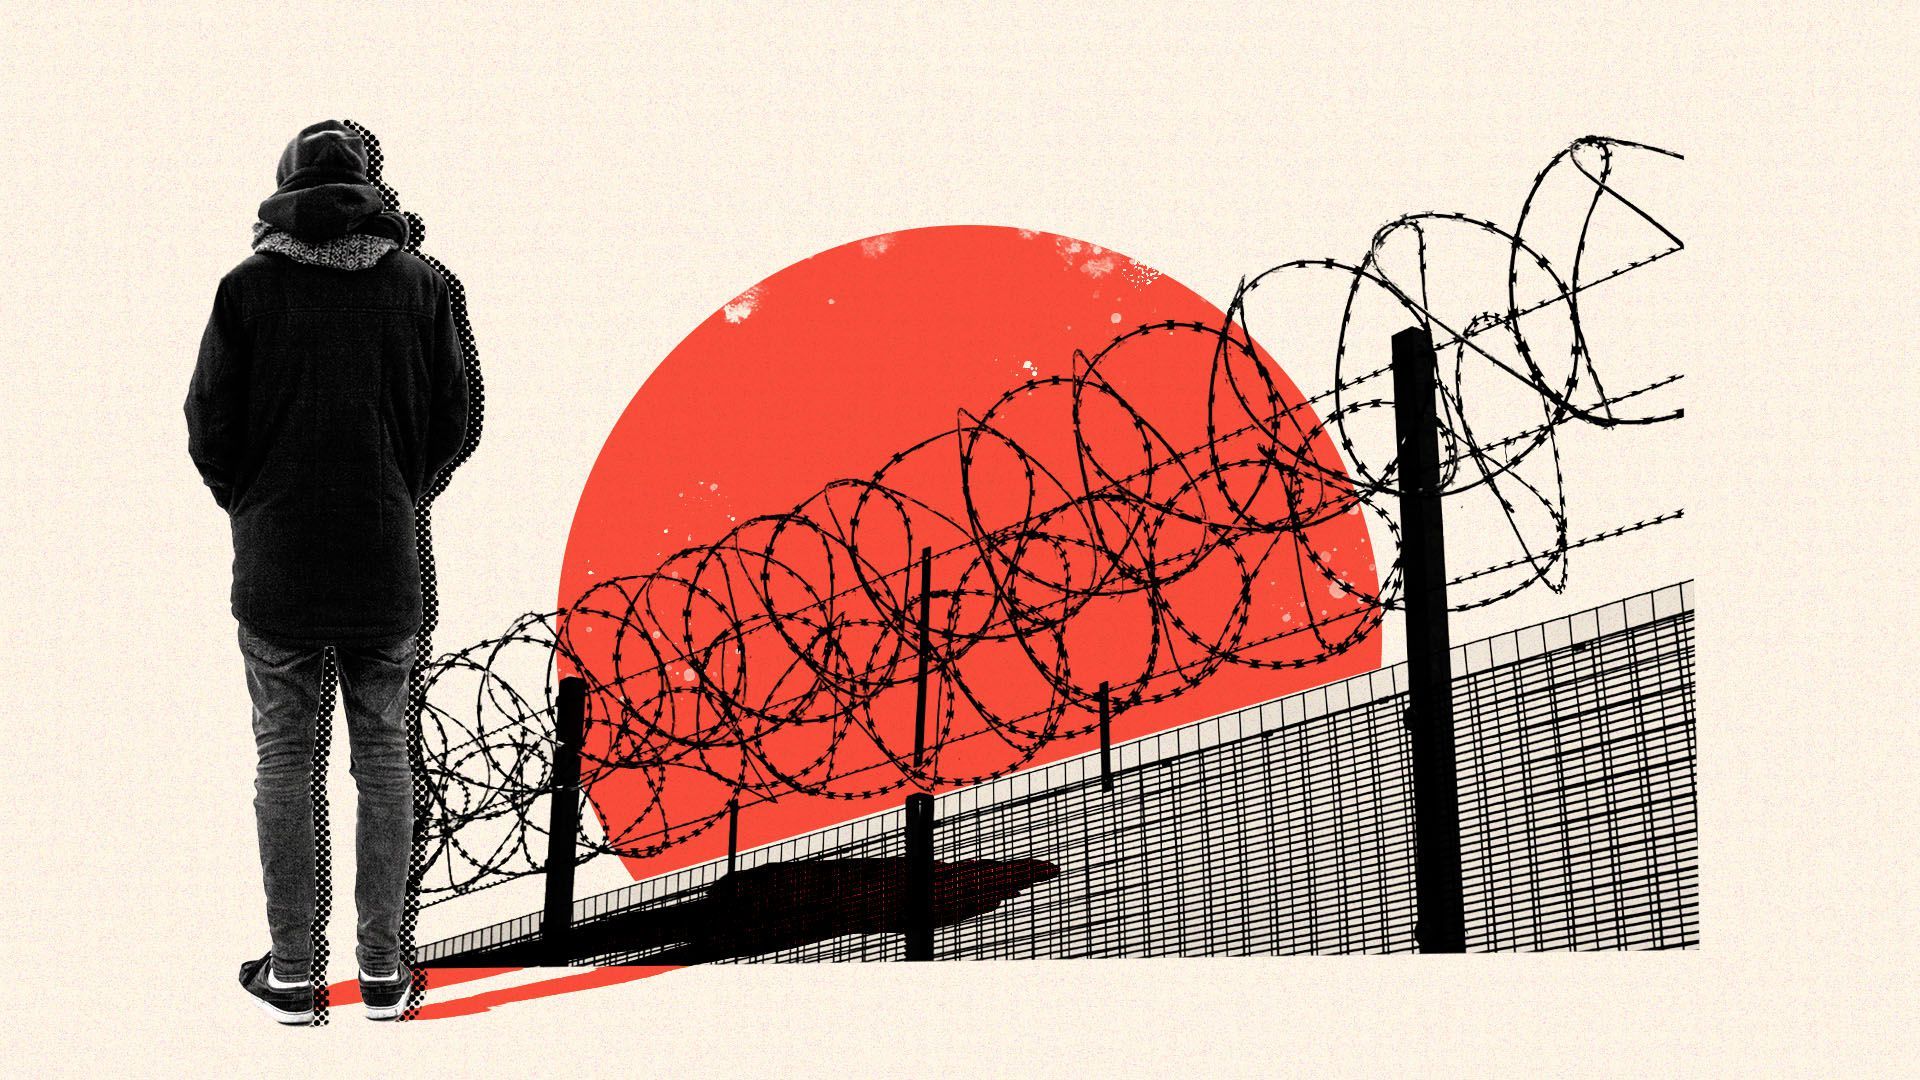 Illustration of a person standing next to a barbed wire fence with a sun in the background